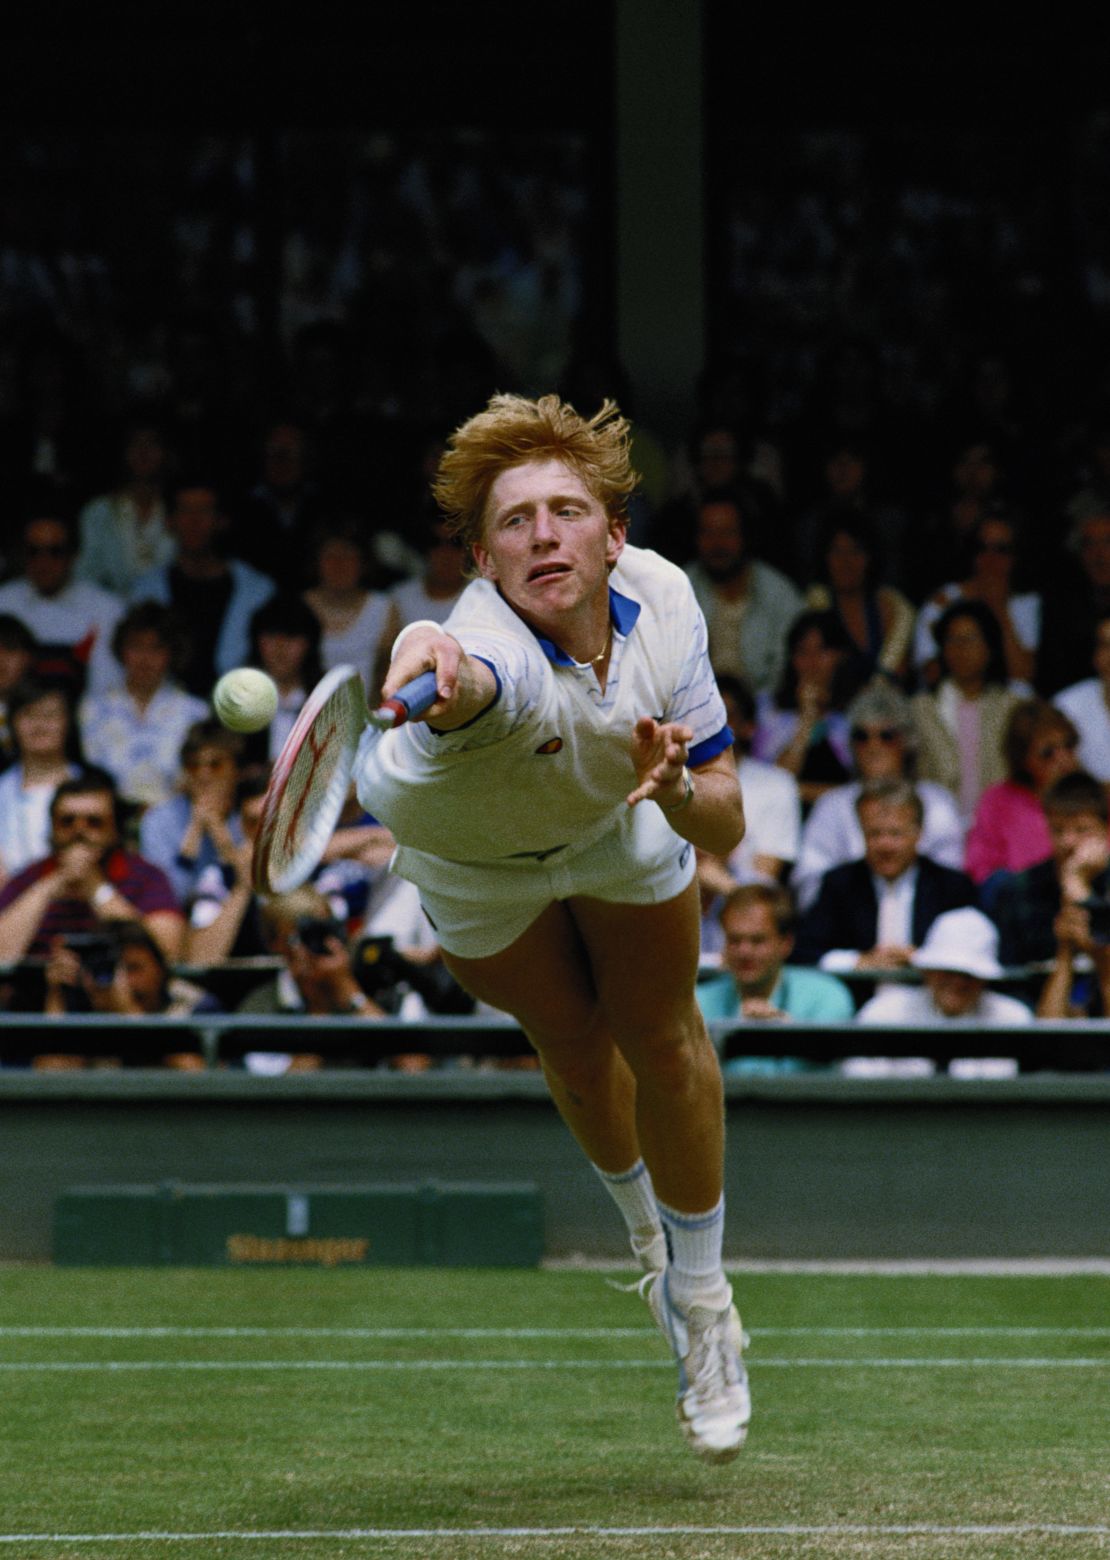 Becker became the youngest man to win Wimbledon at the age of 17 in 1985.